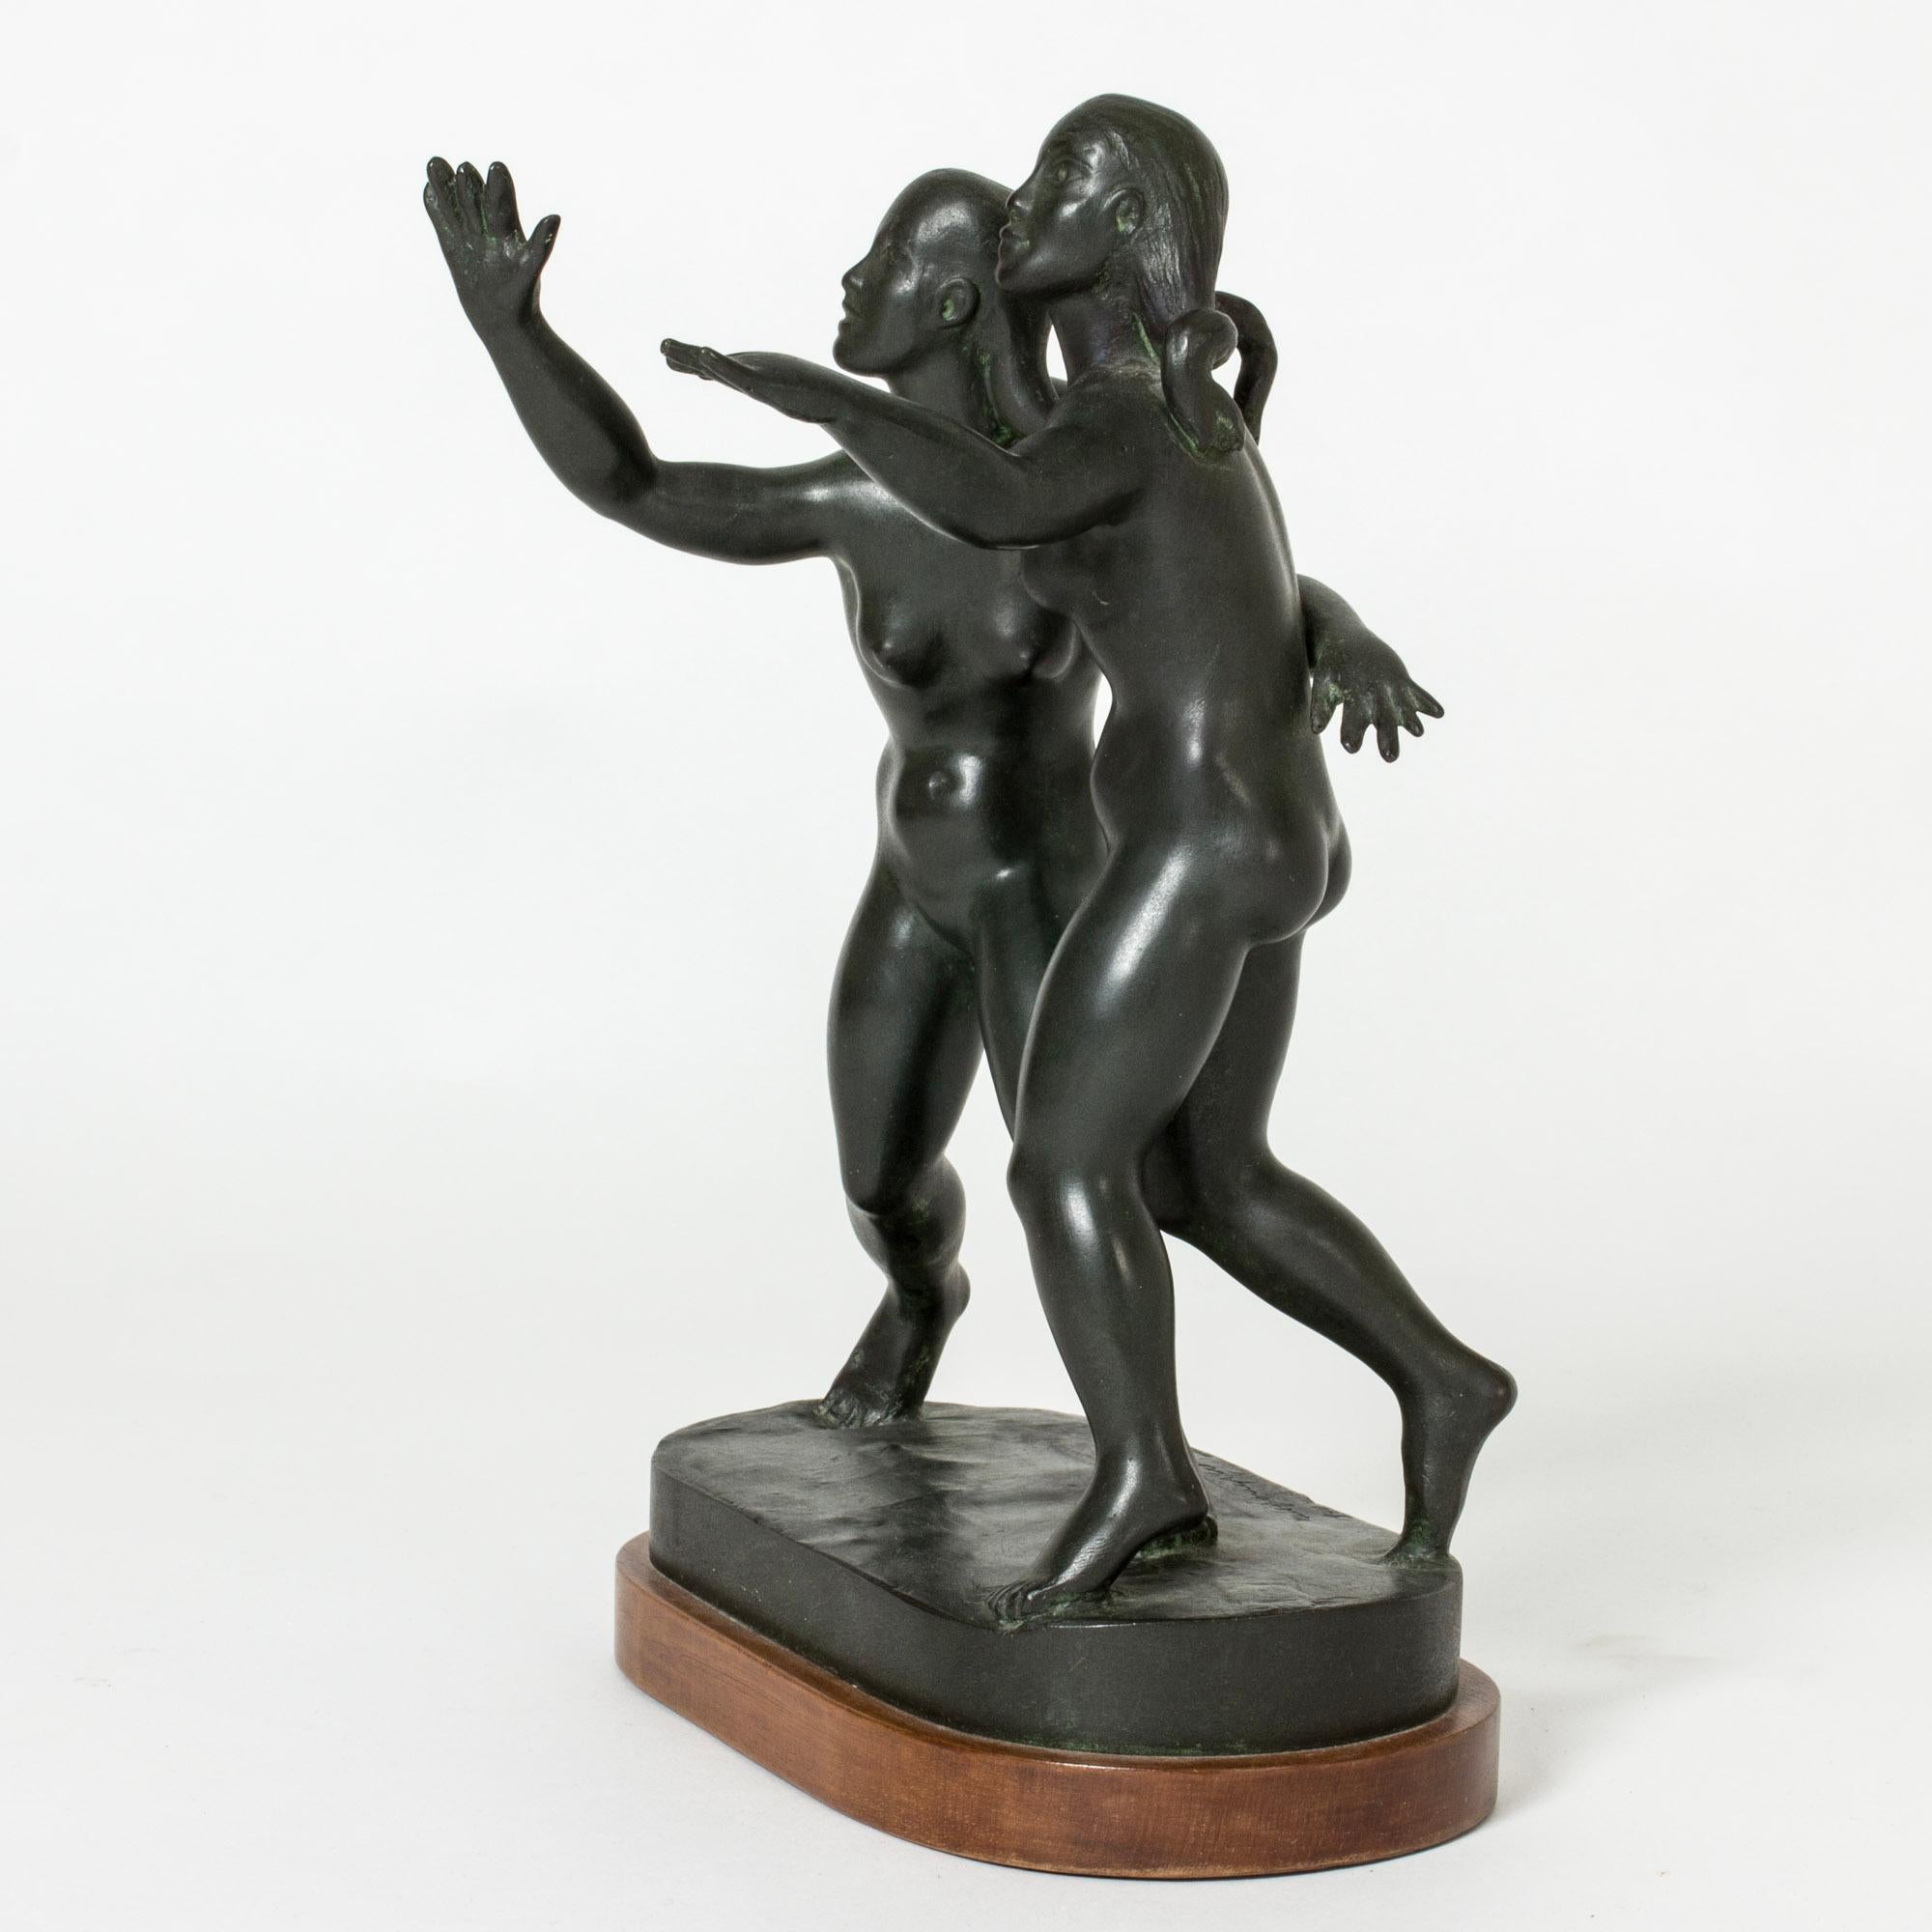 Beautiful bronze figurine by Nils Fougstedt, in the form of two young women. The women are reaching out their arms and have their faces turned upwards. Lovely attention to detail, vivacious expression.